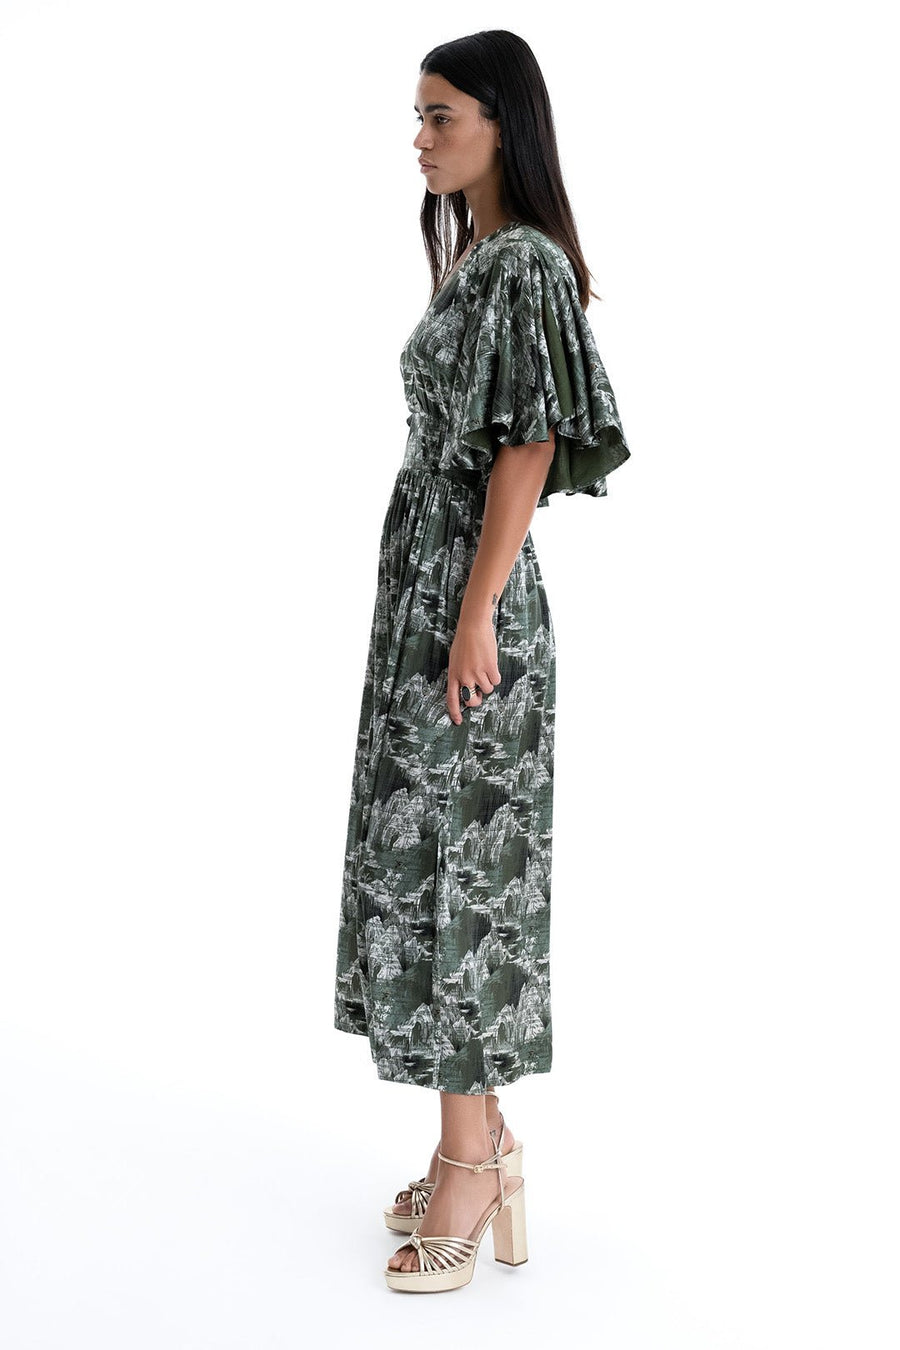 OASIS MIDI DRESS, MEADOW - Burning Torch Online Boutique